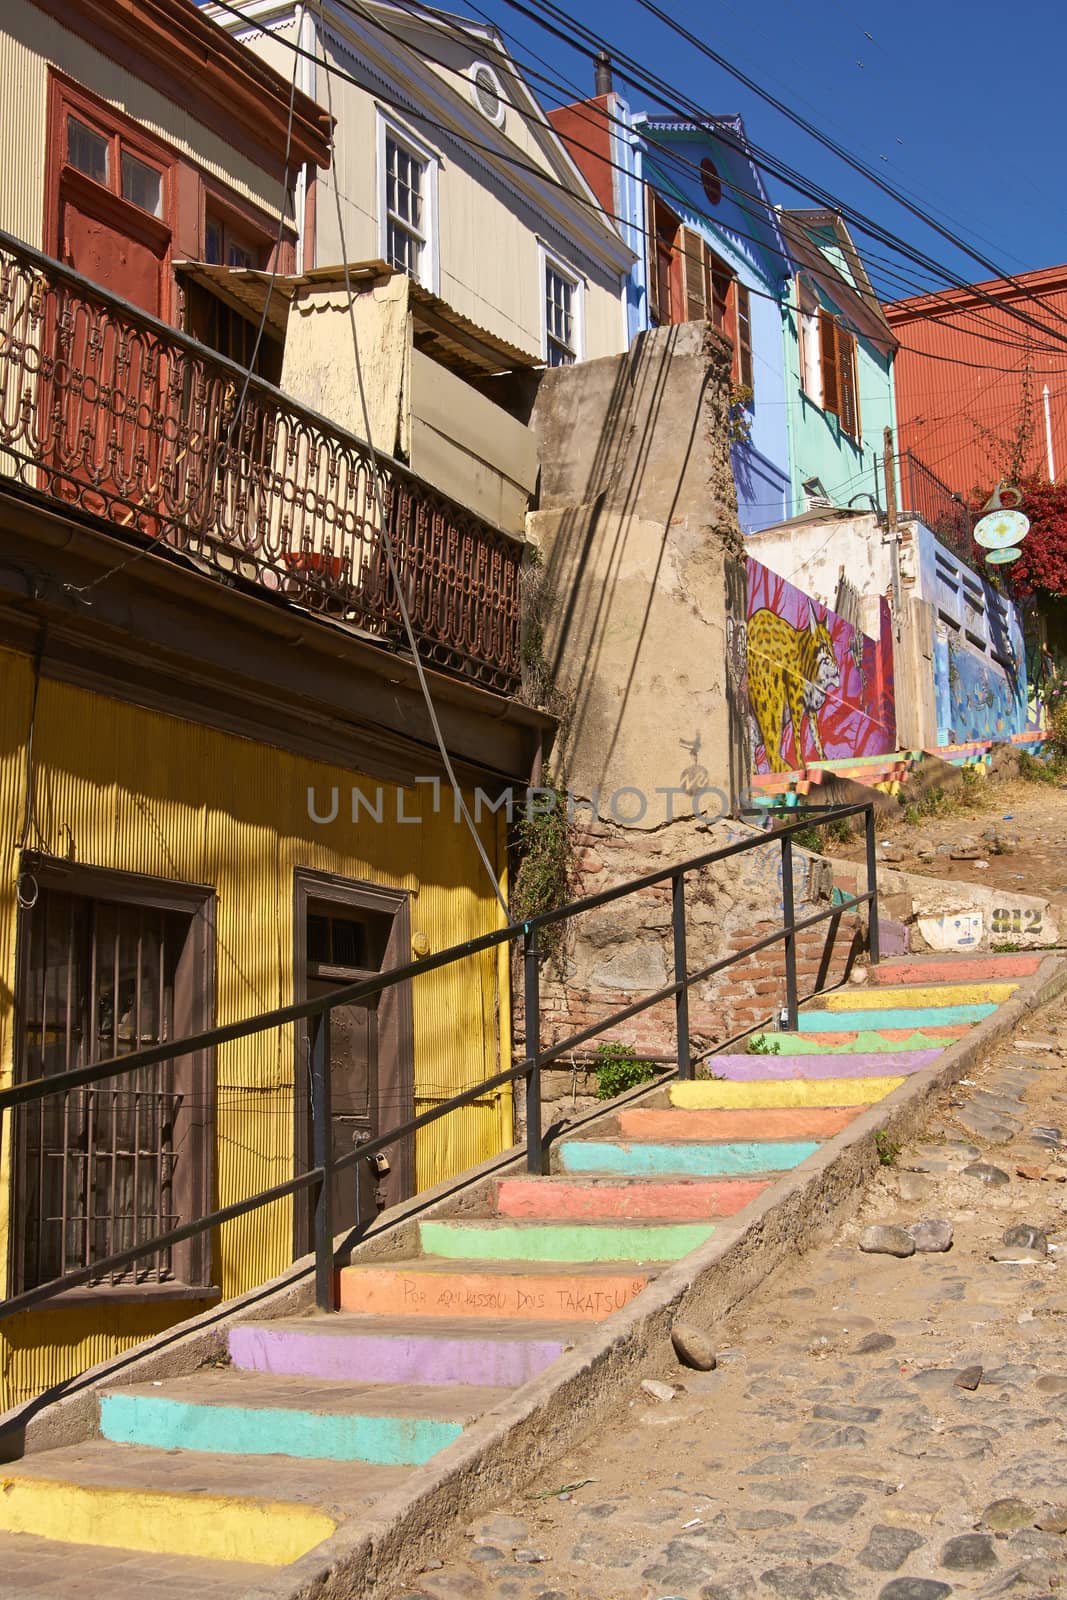 Colourfully decorated houses and steps on Templeman, a historic street in the UNESCO World Heritage port city of Valparaiso, Chile.